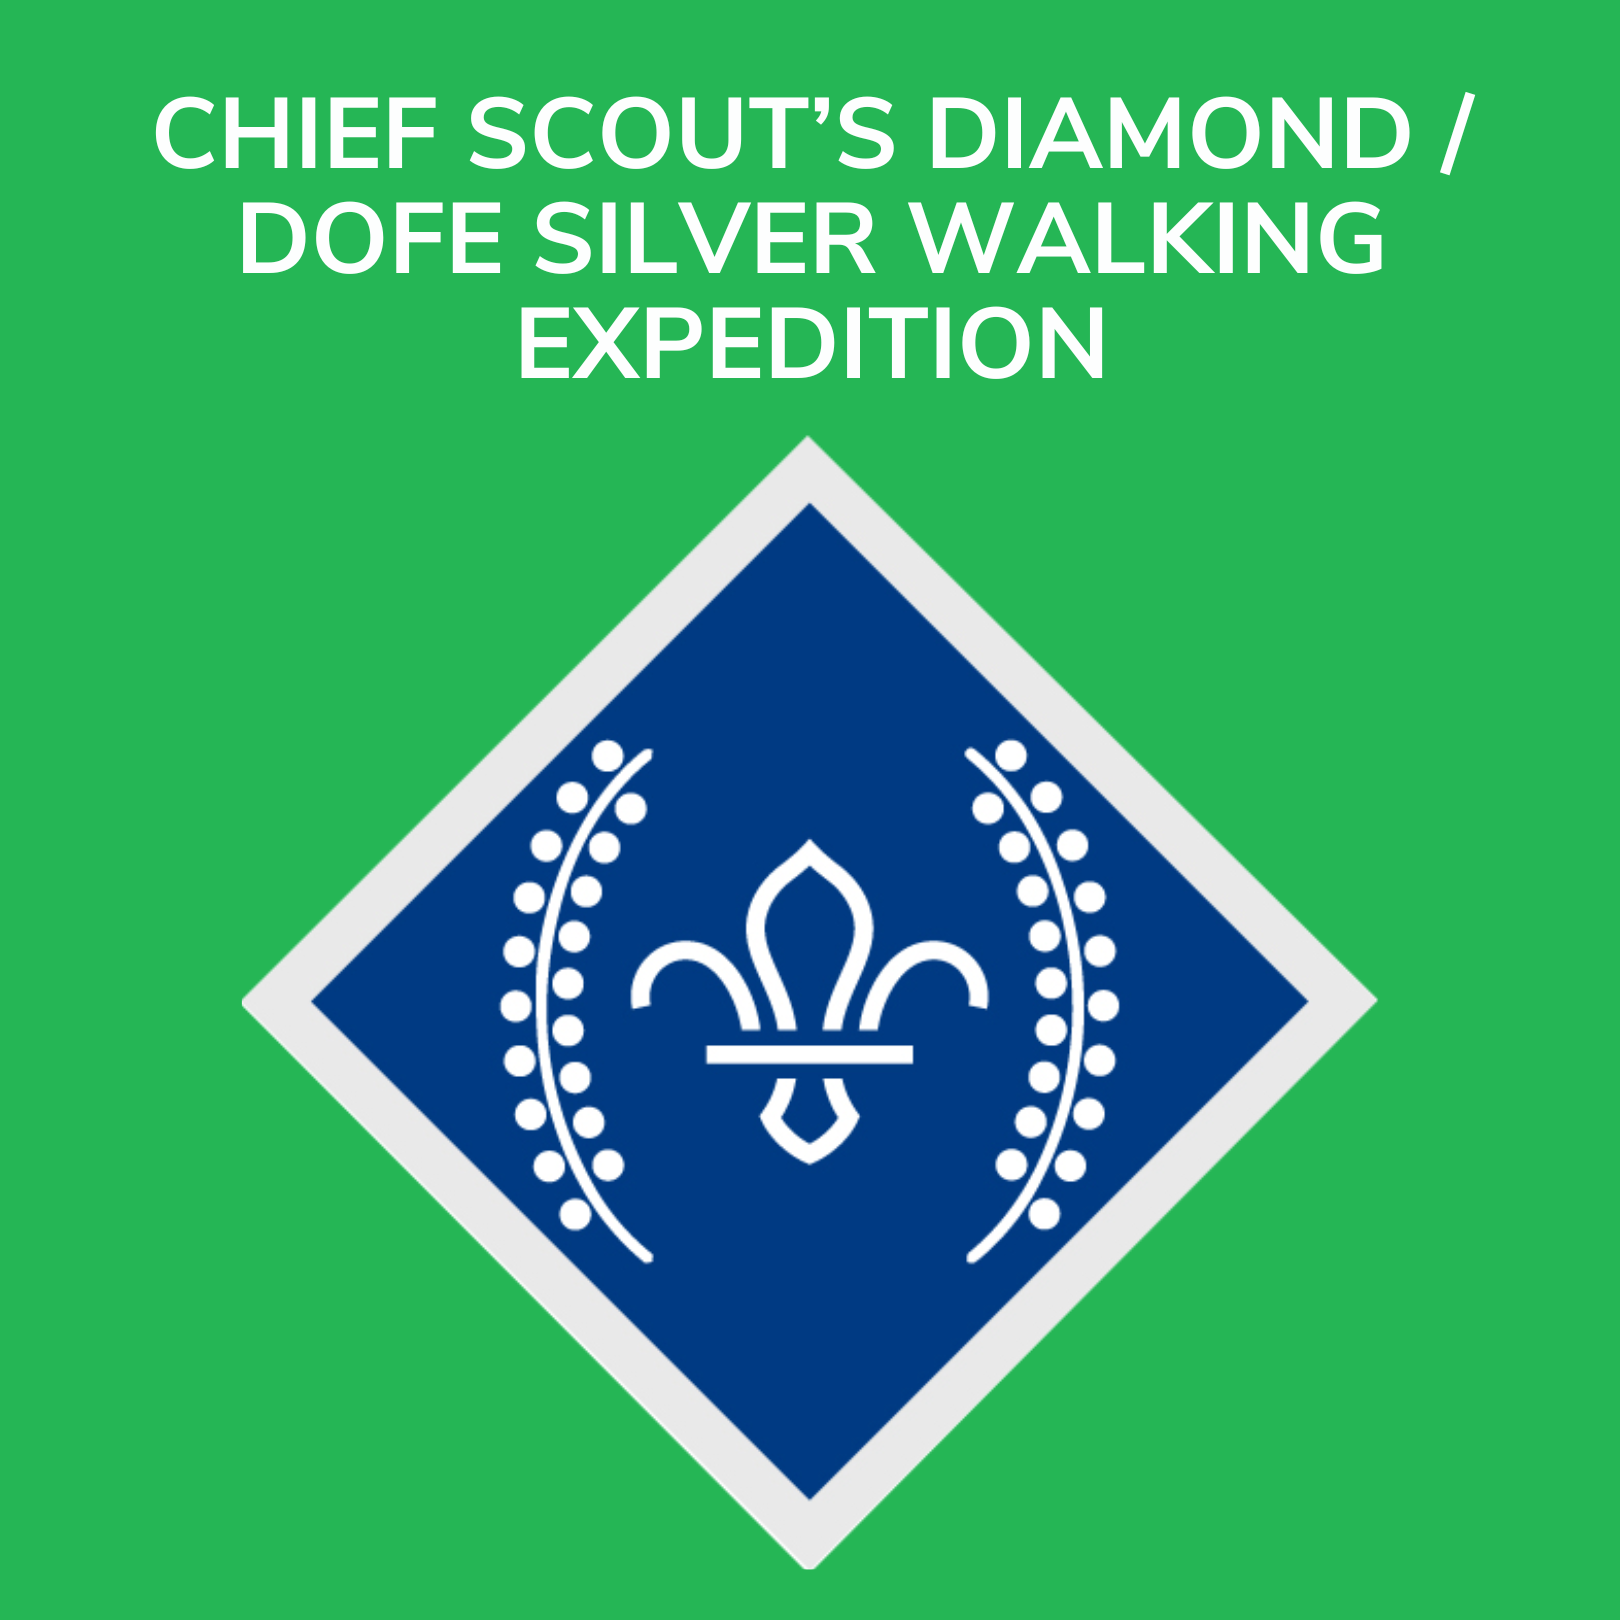 Chief Scout’s Diamond / DofE Silver Walking Expedition Deposit